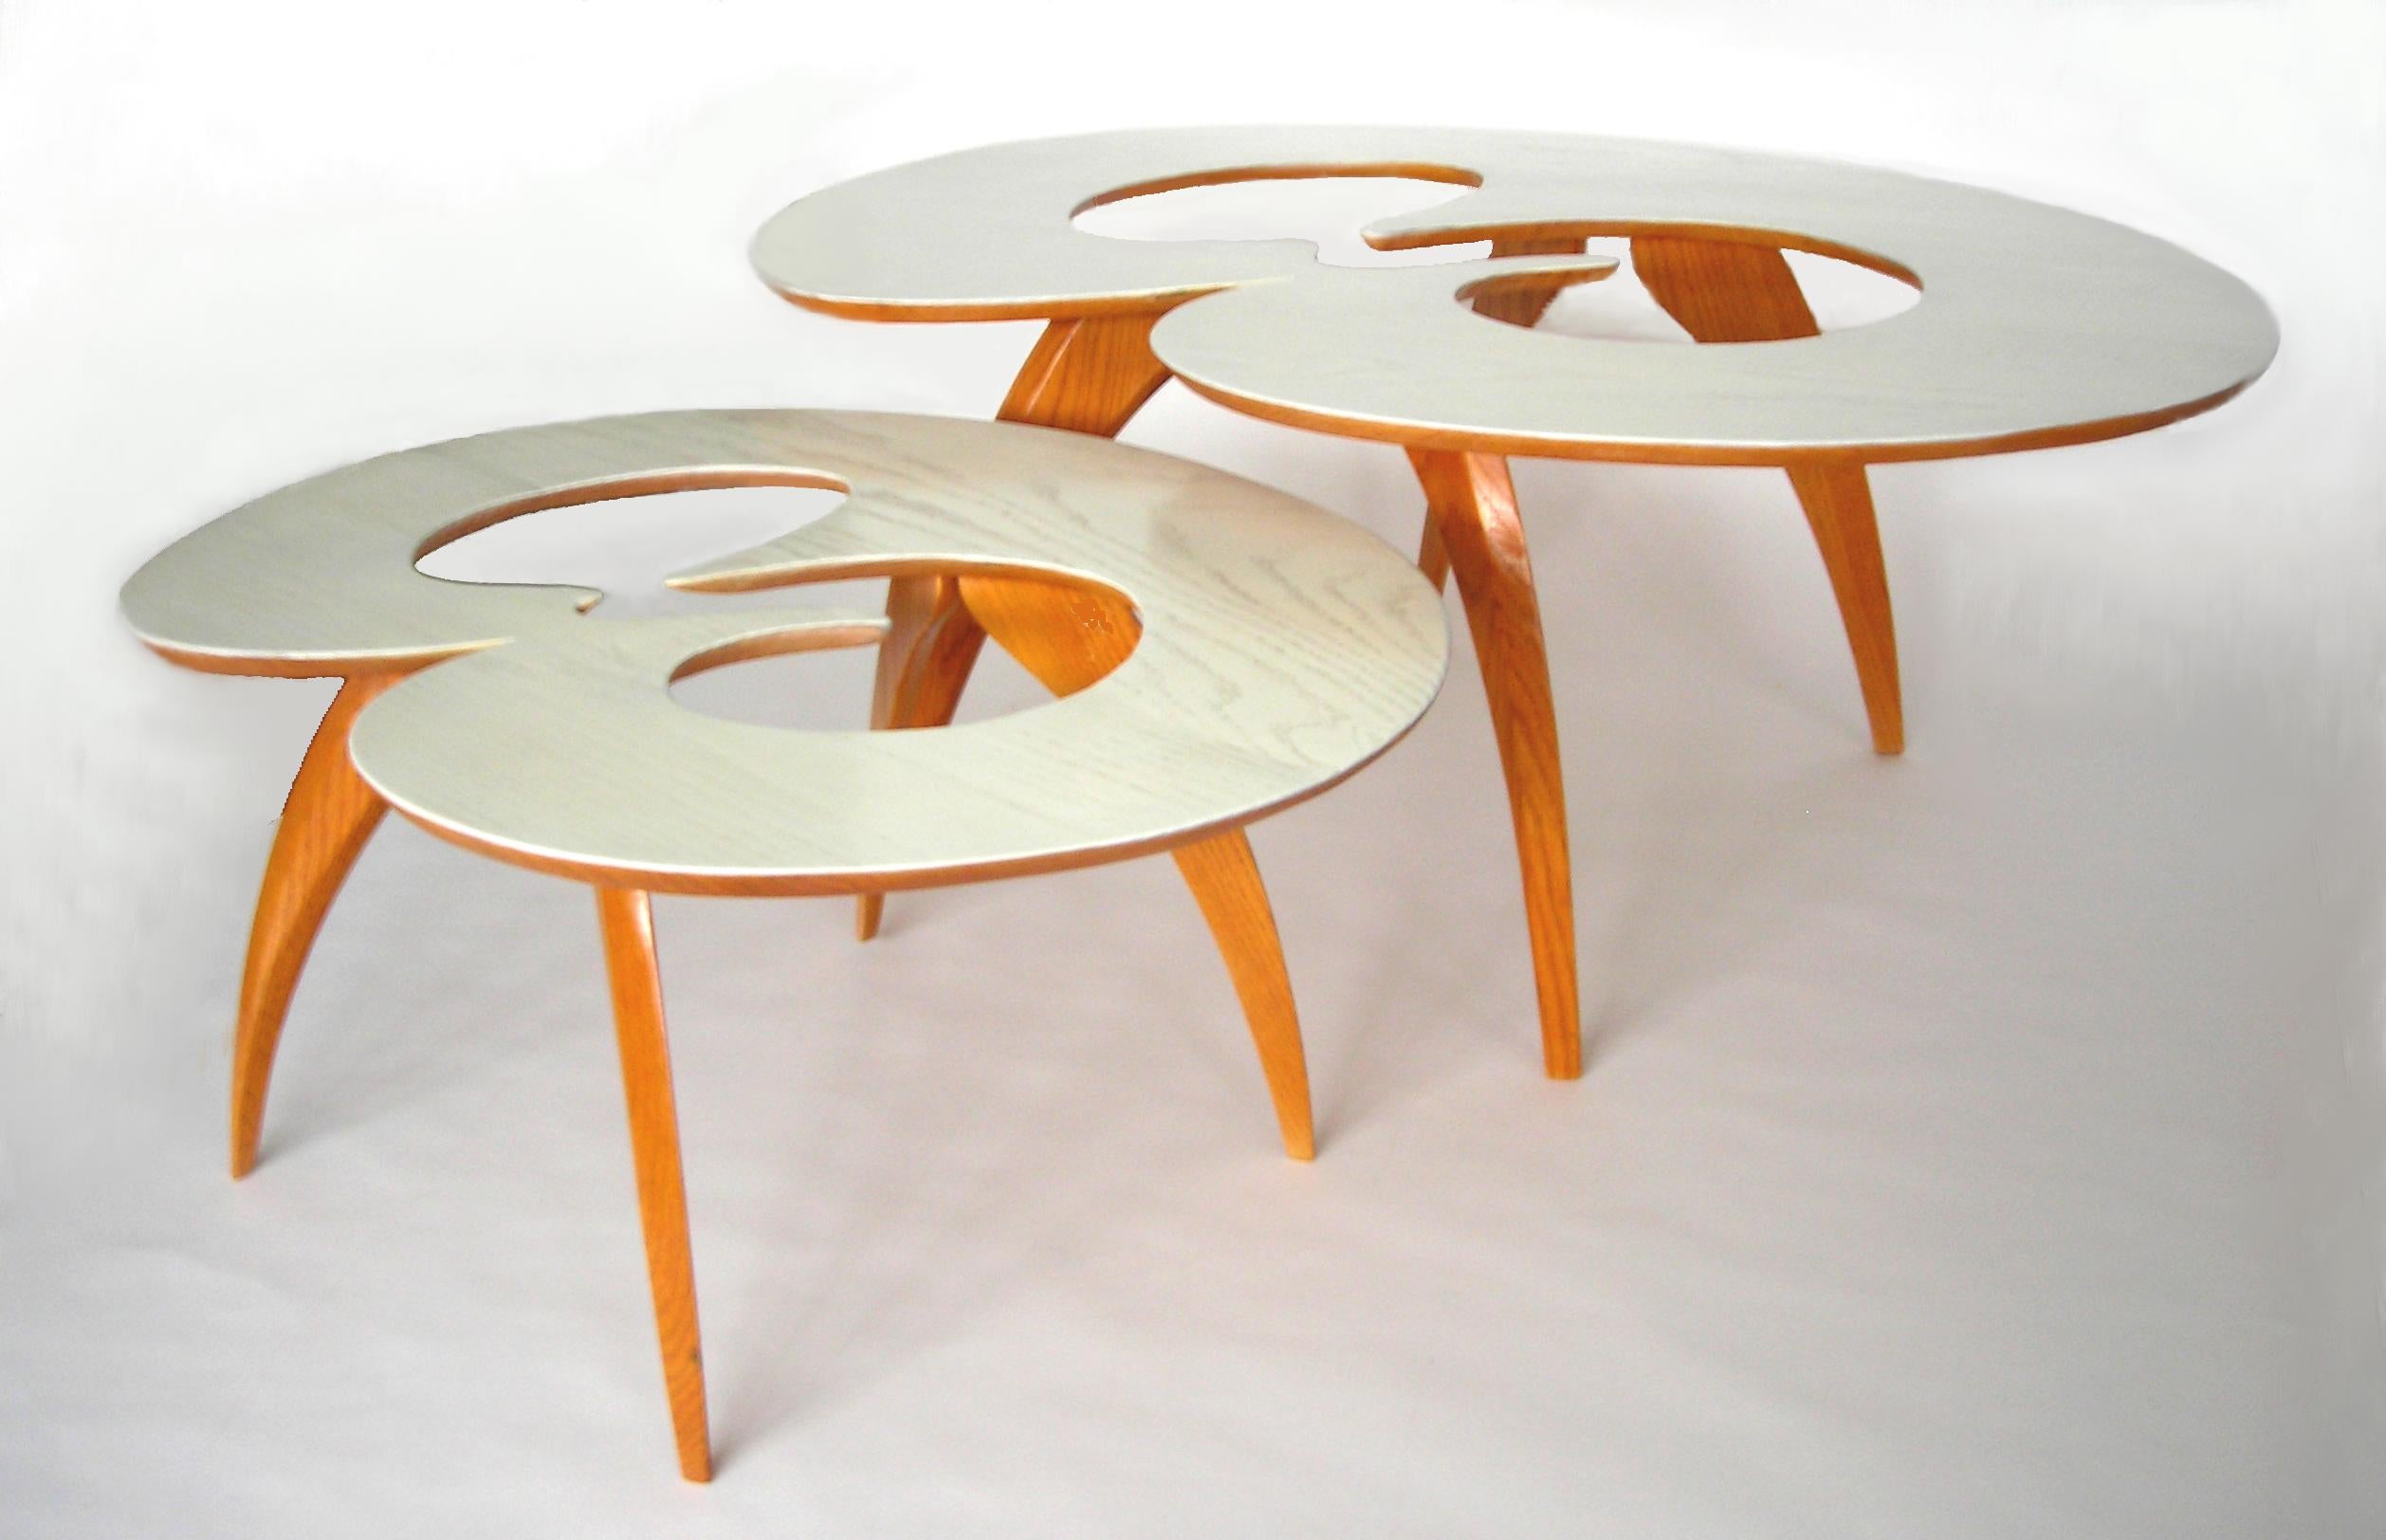 Alejandro Dron Abstract Sculpture - "Mitosis" Hand Made Sculptural Table 